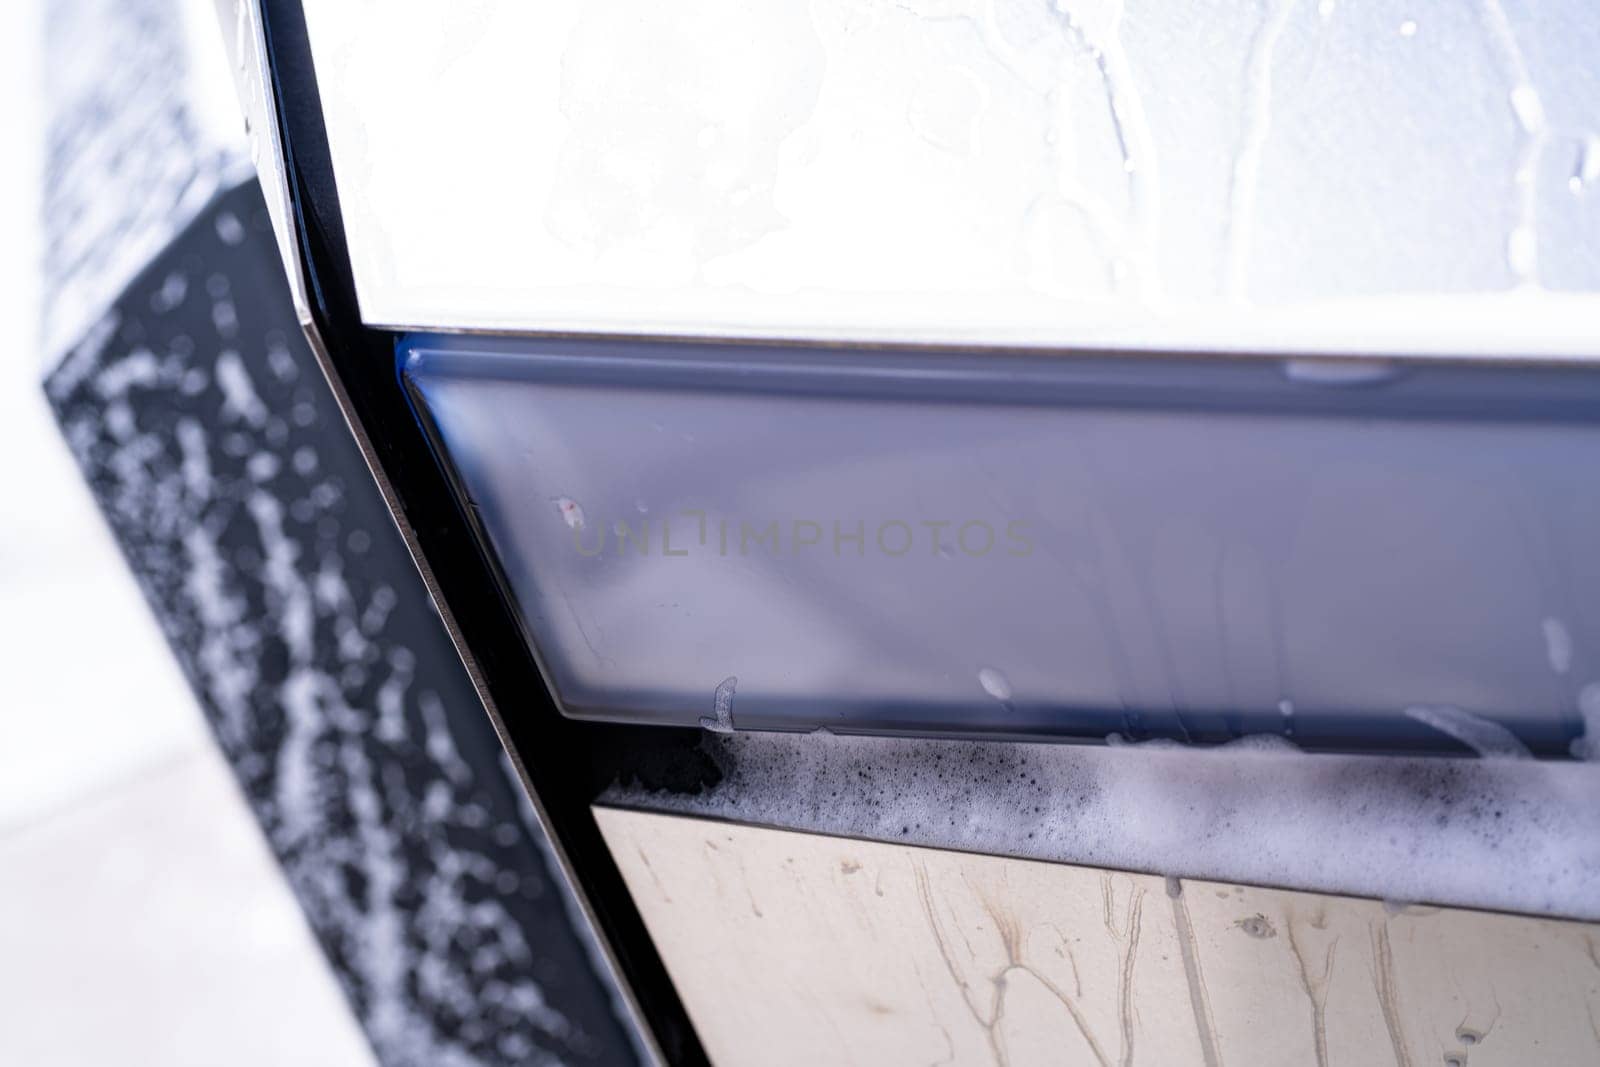 Denver, Colorado, USA-May 5, 2024-This image captures a detailed close-up of a Tesla Cybertruck sleek exterior, showcasing the edge where the body meets the window, highlighted by soap suds and water during a cleaning session. The angular design and reflective surface emphasize the futuristic style of the vehicle.